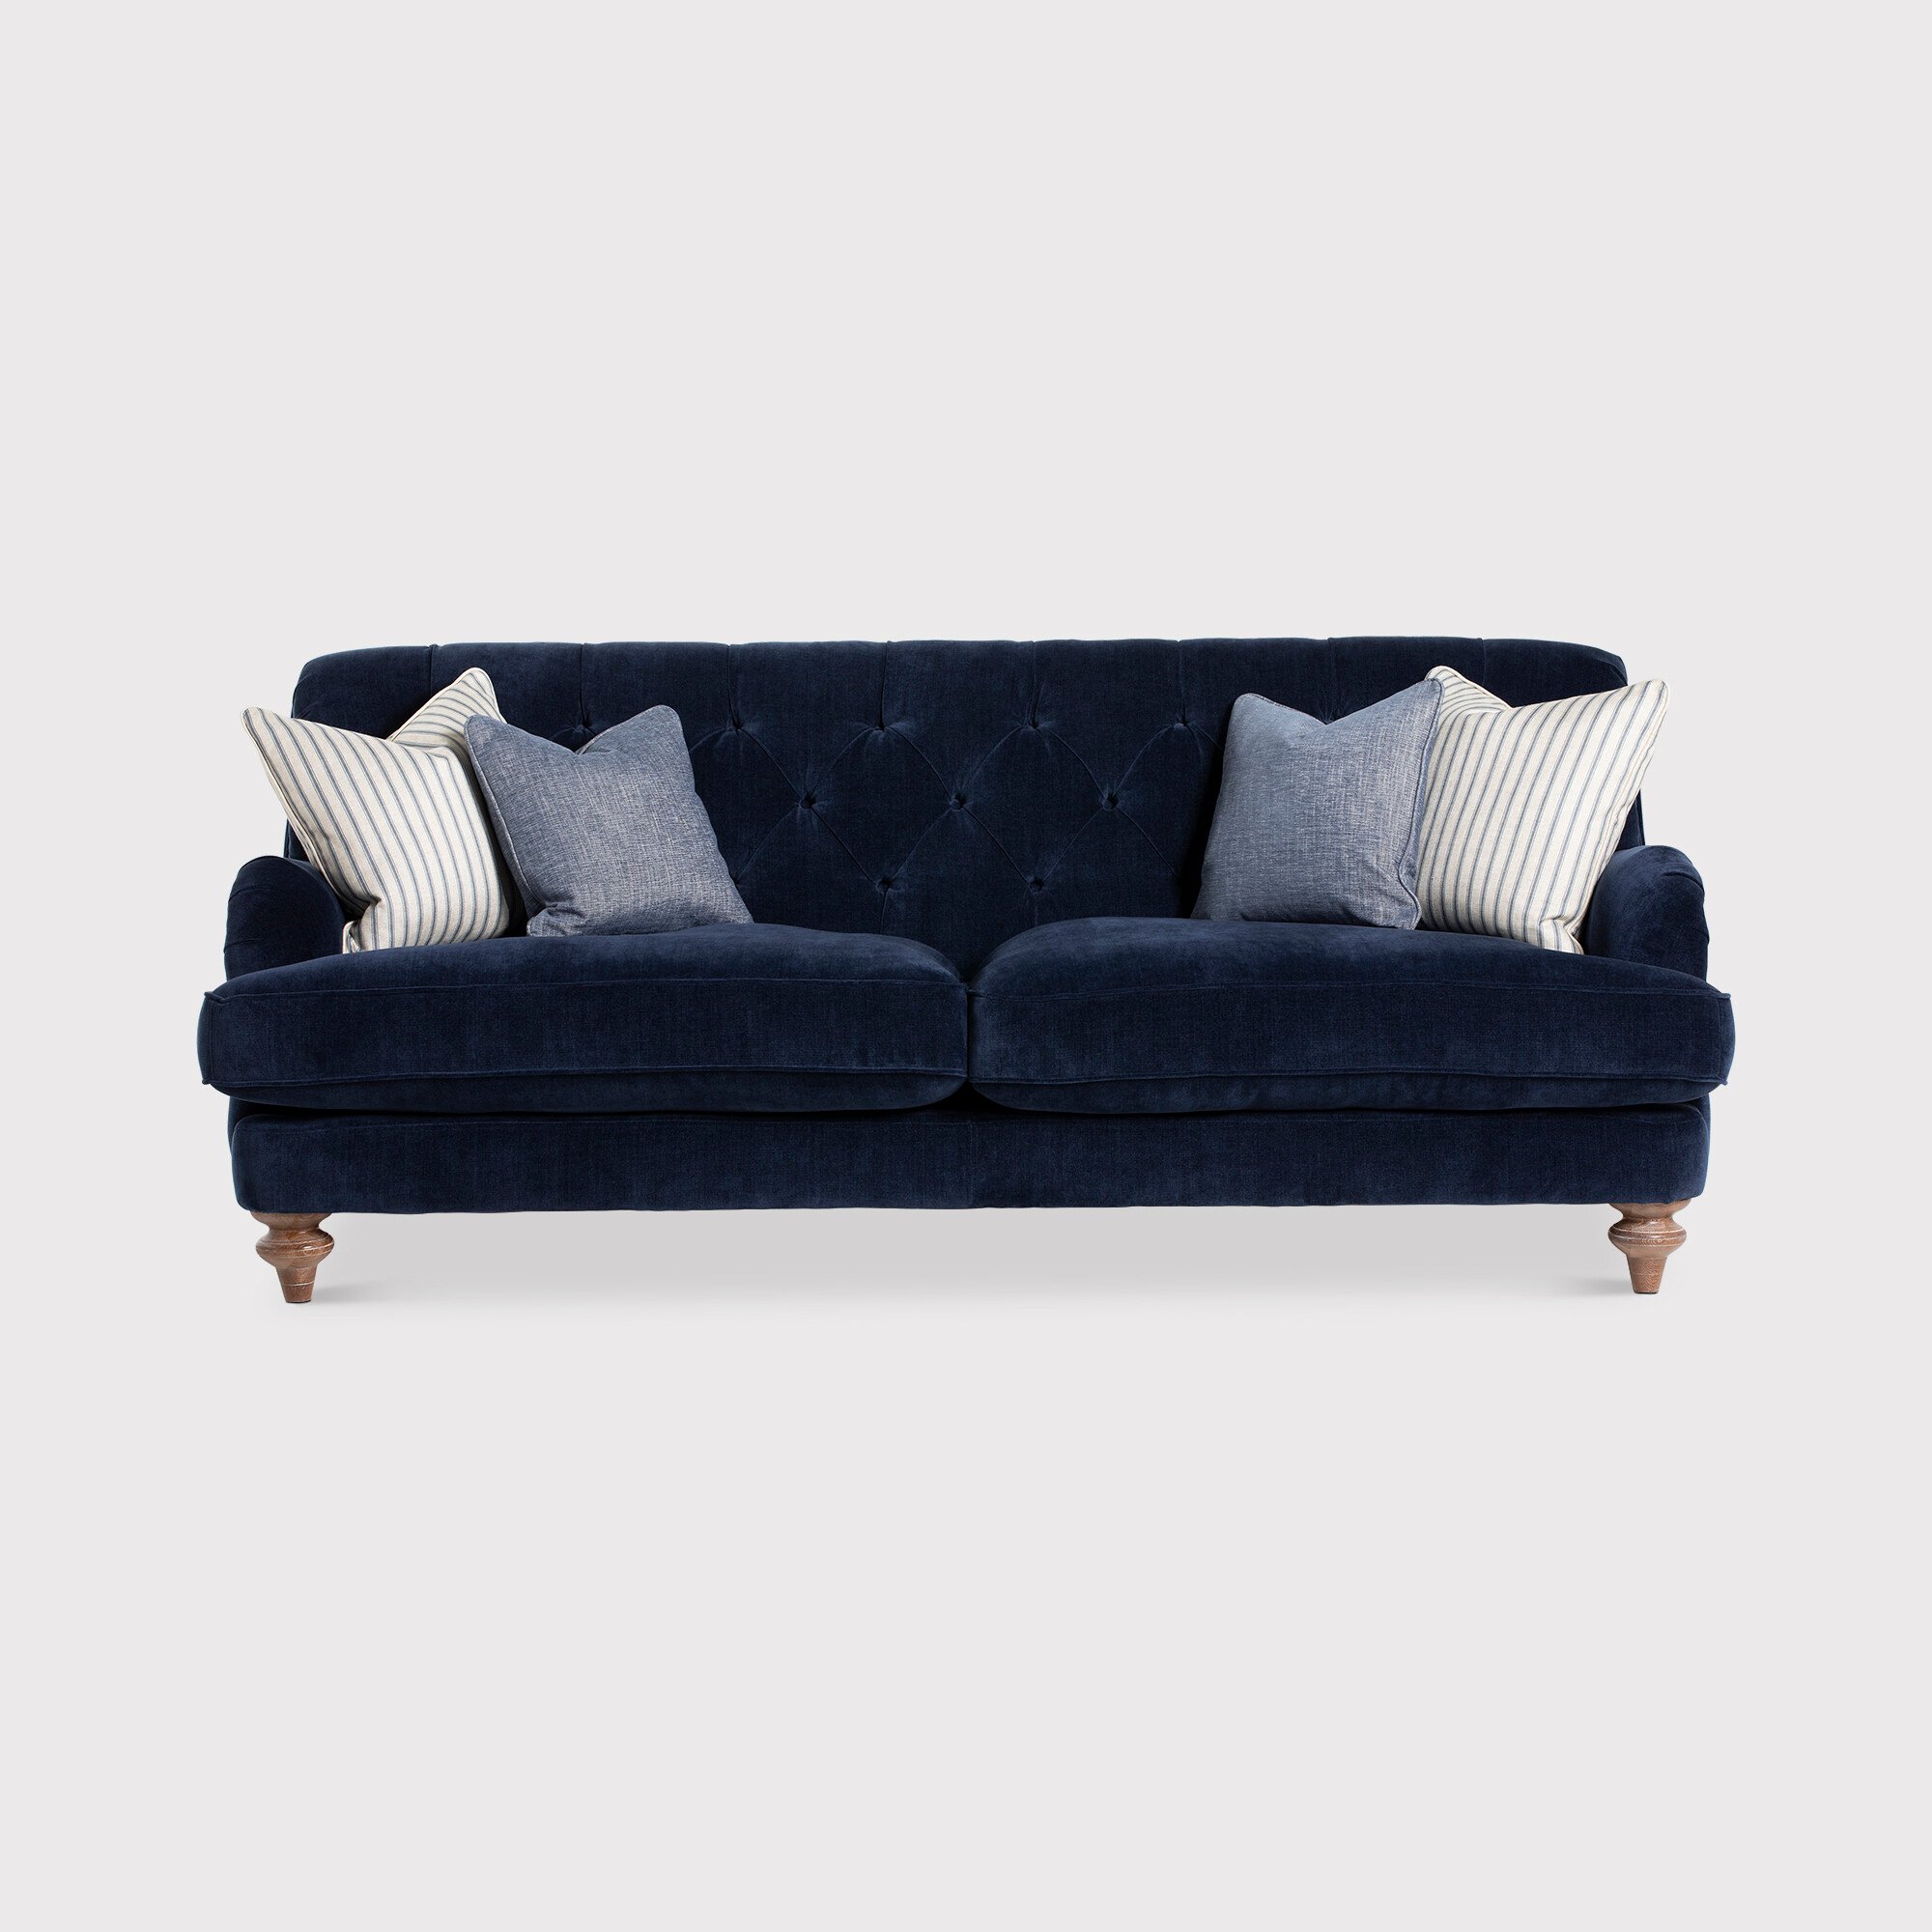 Windermere Large Chesterfield Sofa | Barker & Stonehouse